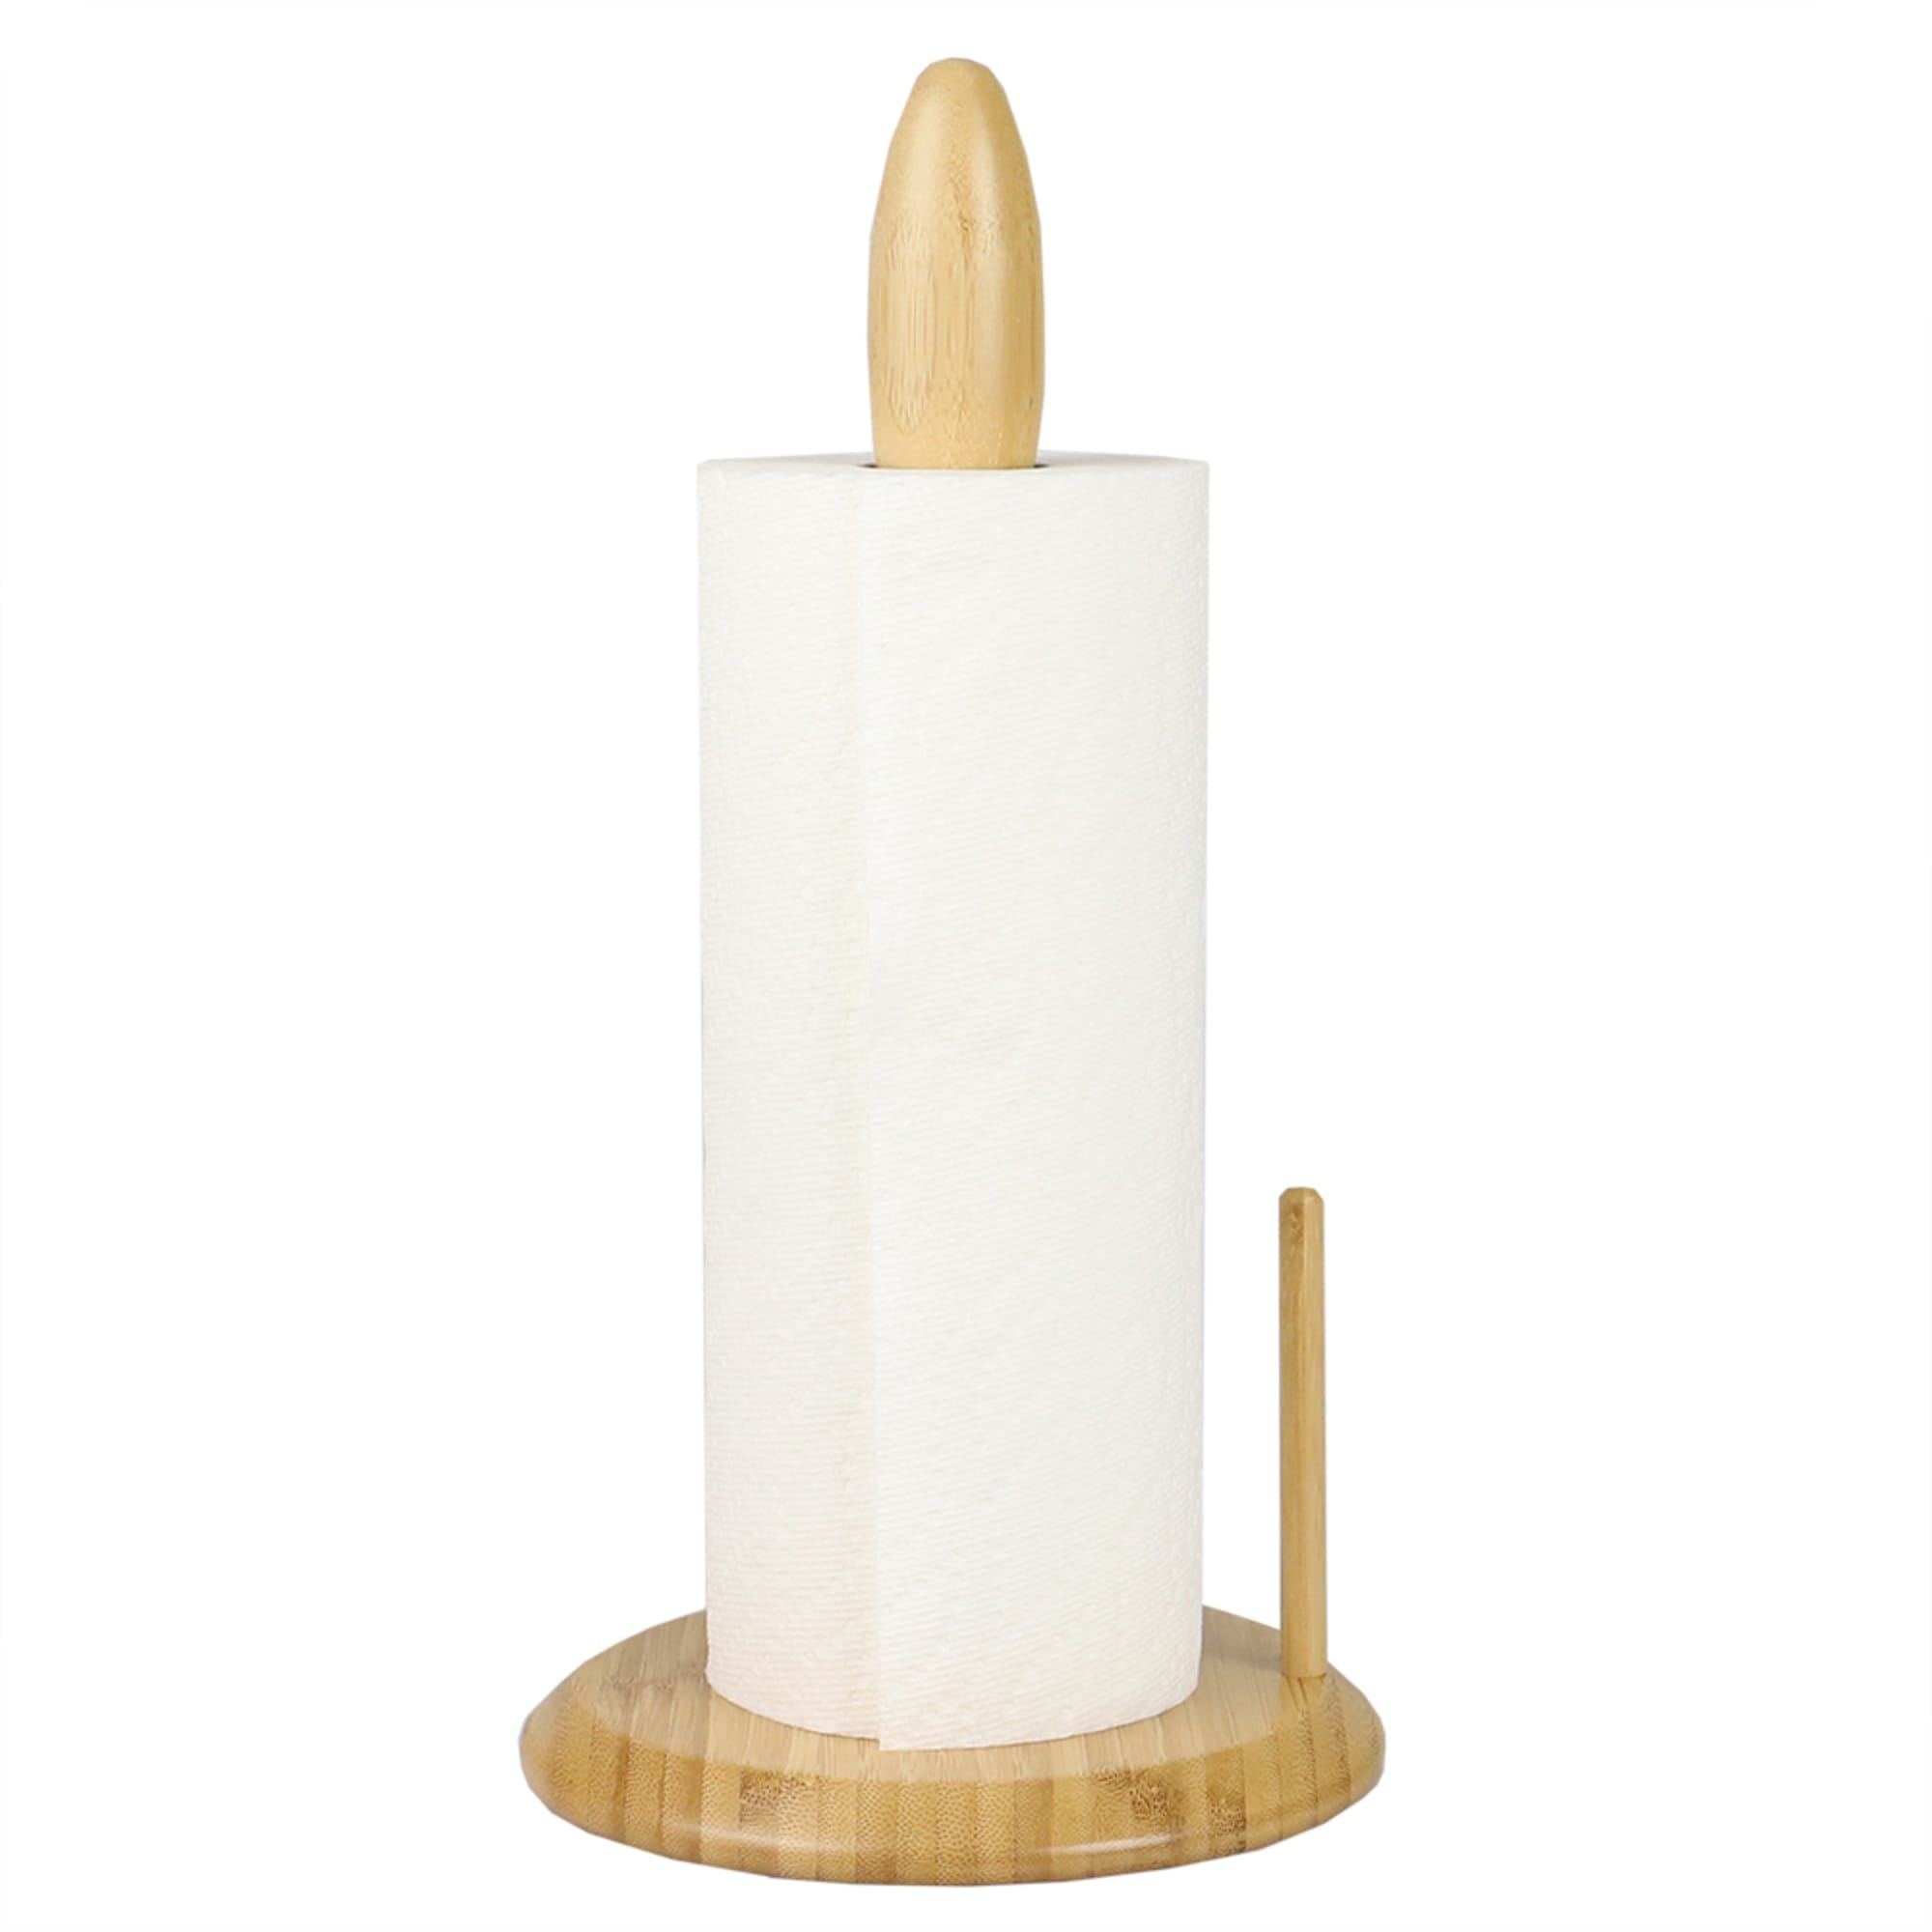 Michael Graves Design Freestanding Bamboo Paper Towel Holder with Side Bar, Natural $12.00 EACH, CASE PACK OF 4